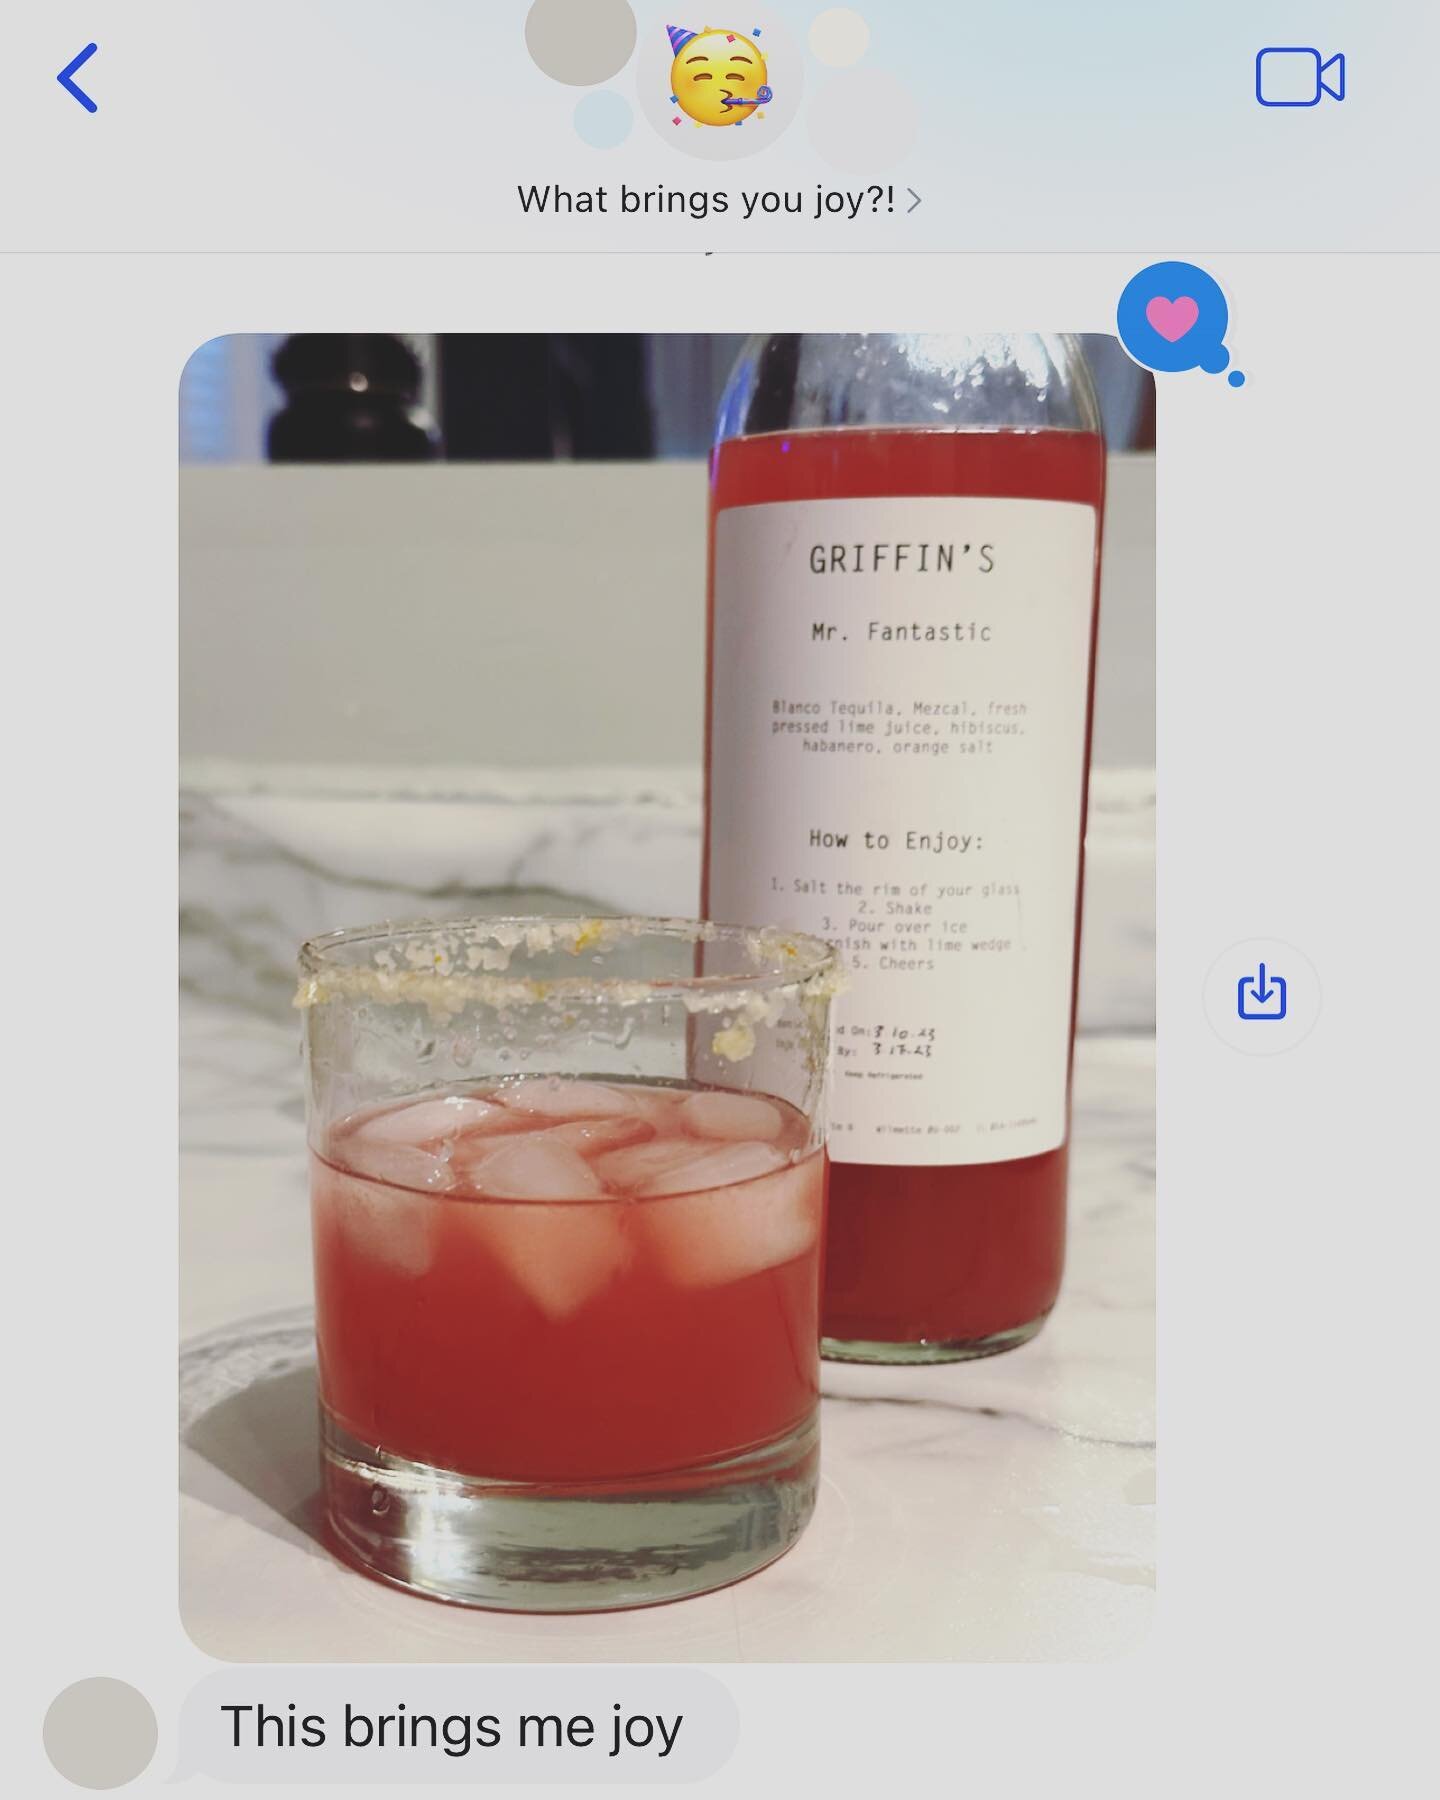 We started GRIFFIN&rsquo;S because we believe high-quality craft cocktails shouldn&rsquo;t be confined to visiting a bar or restaurant, but should be available for enjoyment in your own home. Receiving messages like these makes us happy but also remi